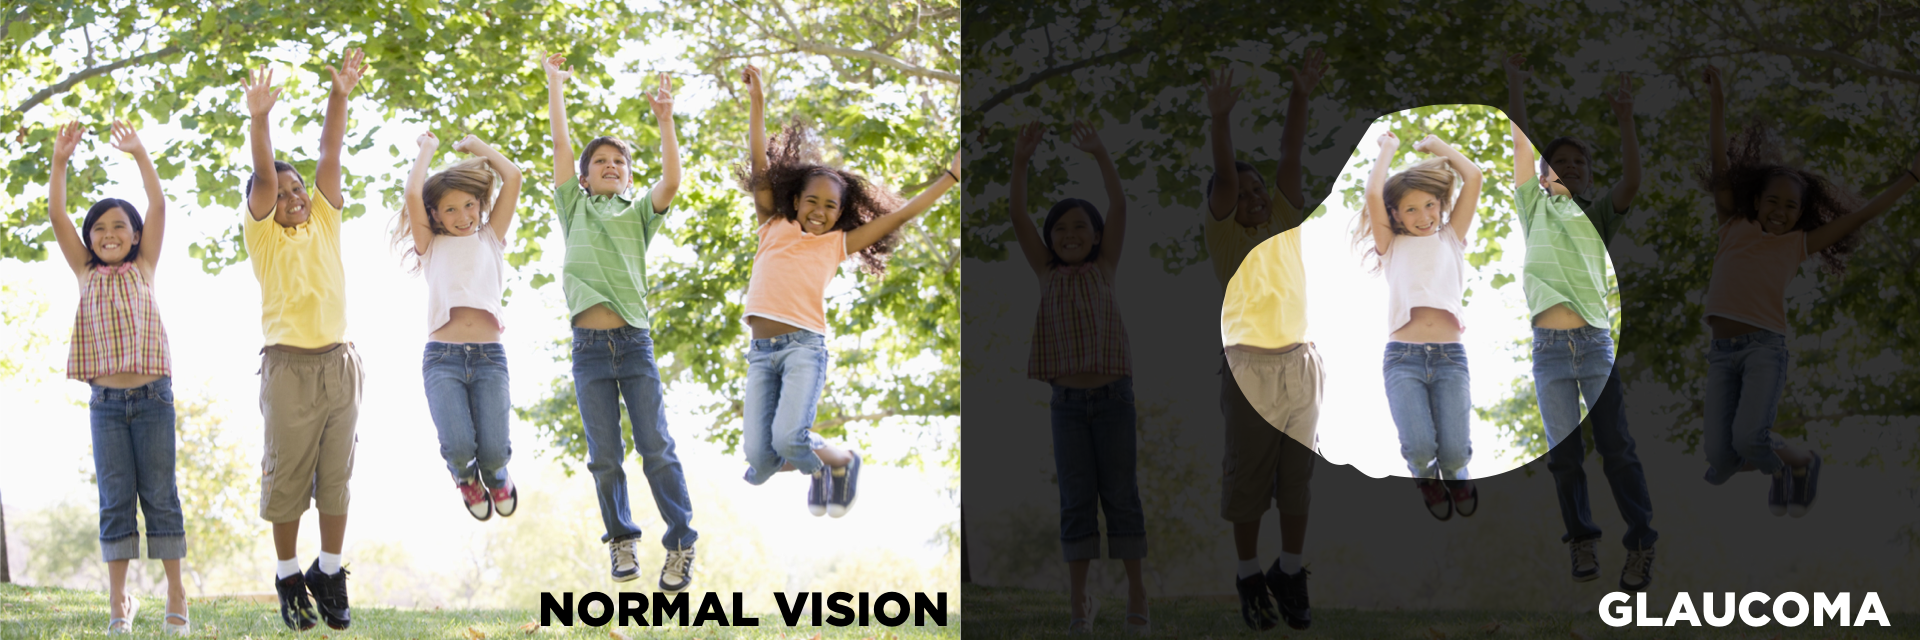 simulated vision of children normal vs glaucoma